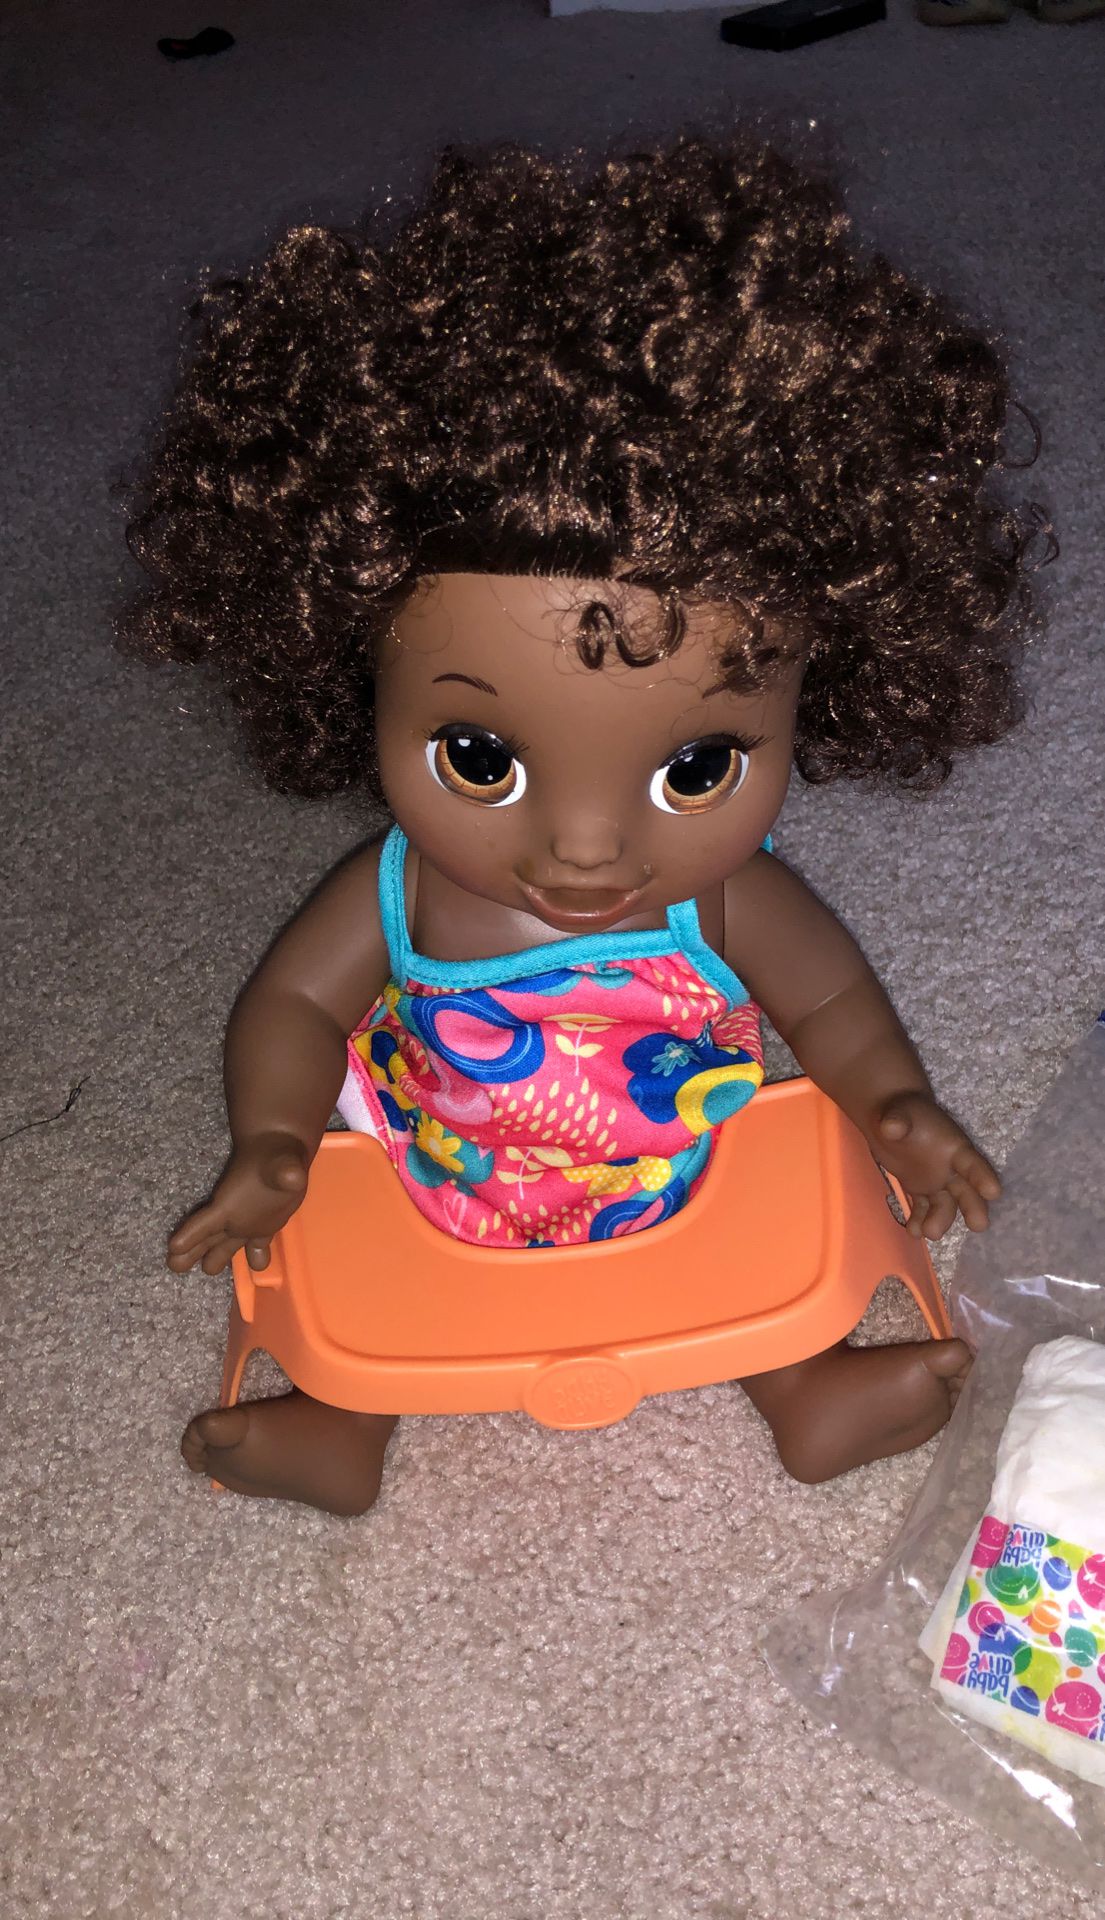 Baby Alive with food $25